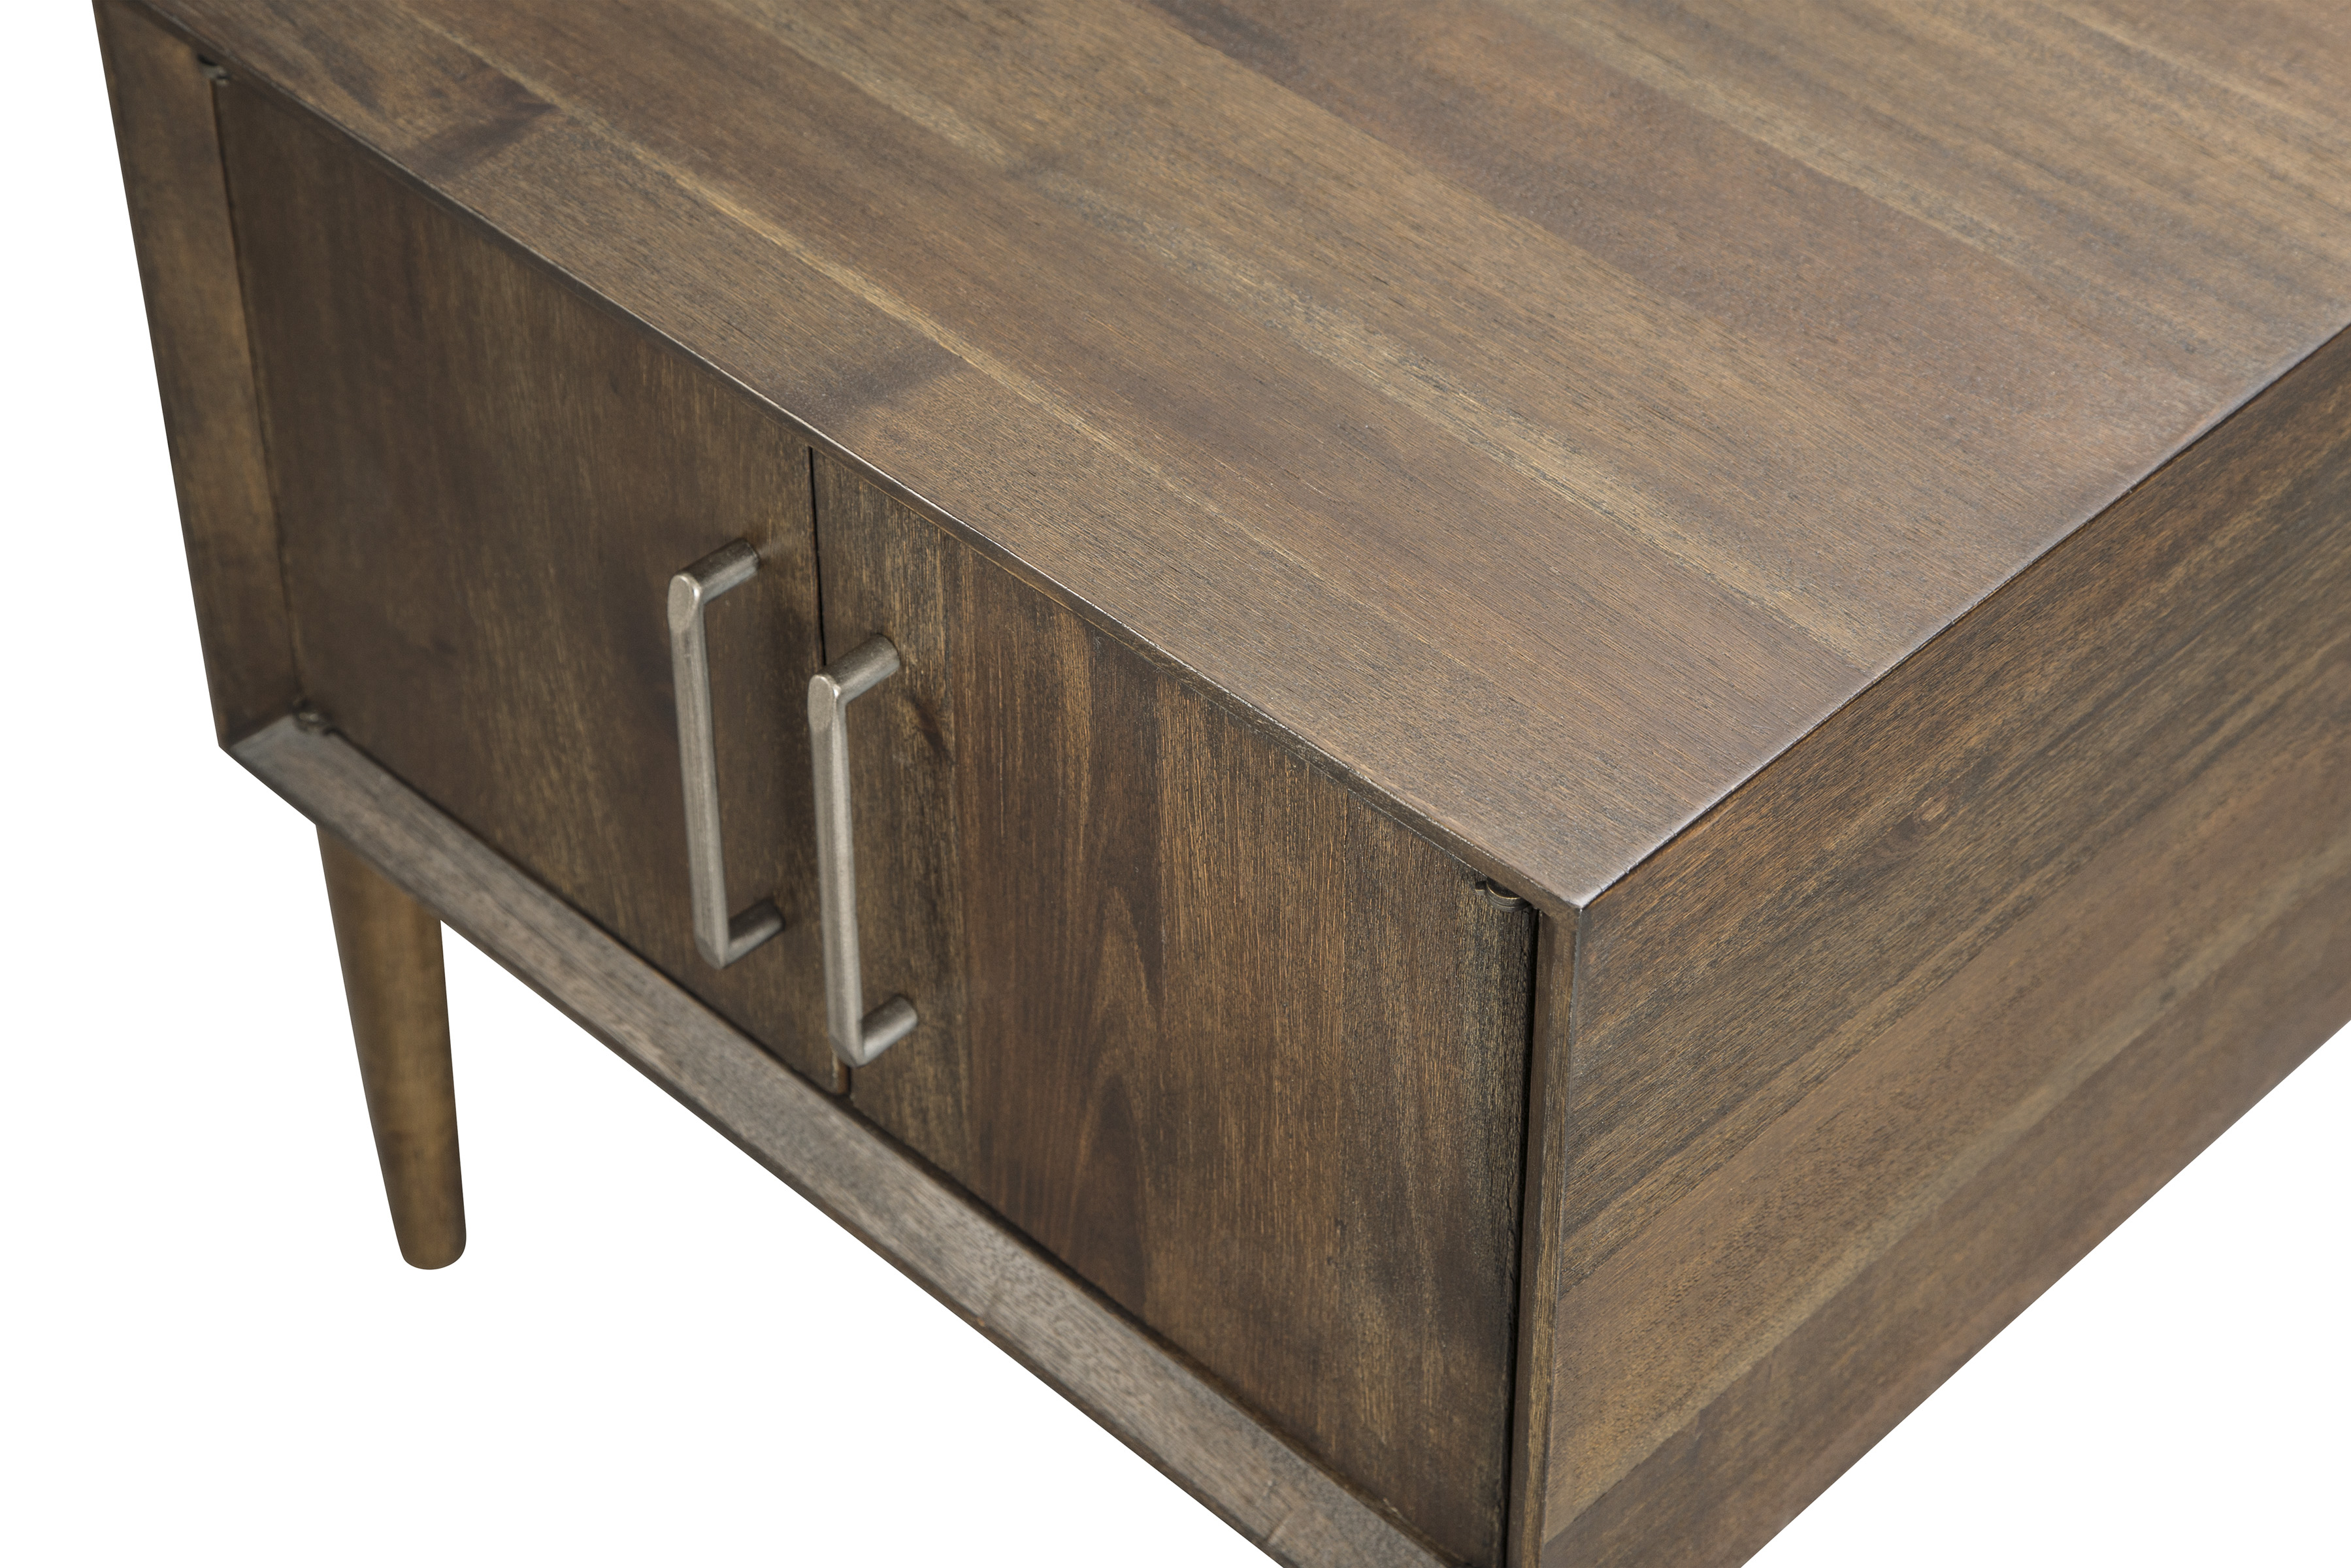 Murray Minimalist Style Square Side Table